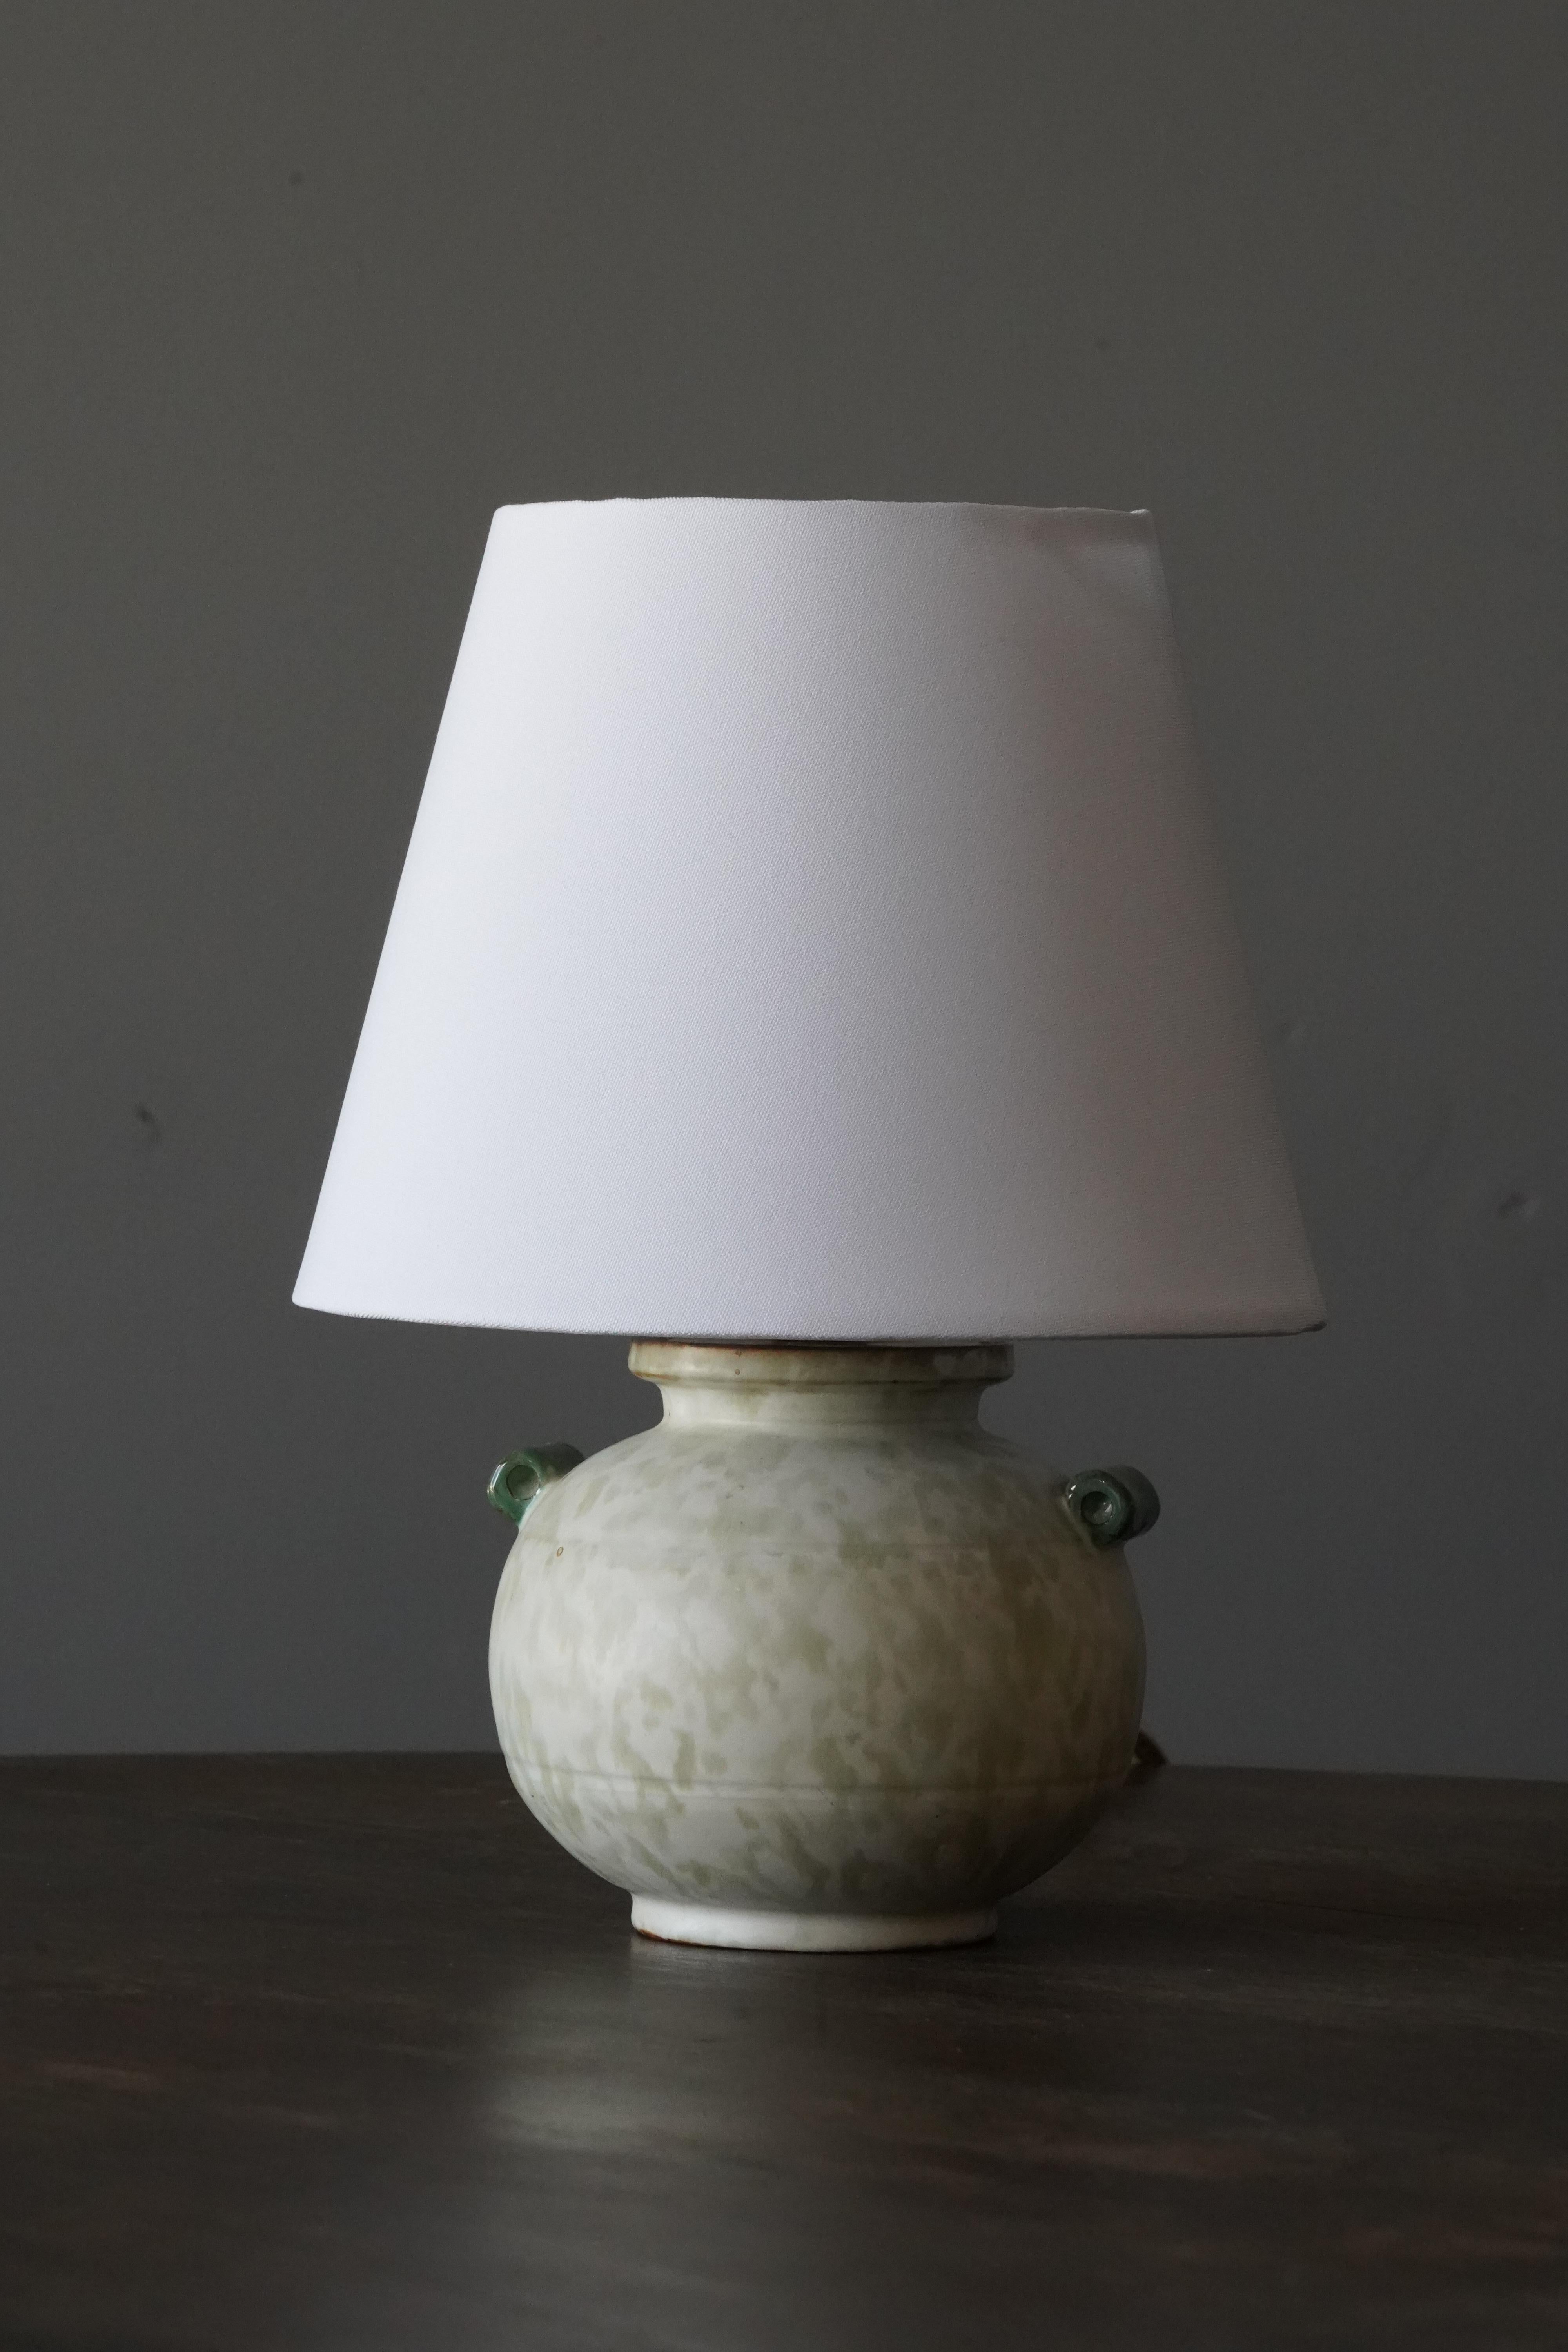 An early modernist table lamp. by Upsala-Ekeby, Sweden, 1930s. Stamped. Incised decor. 

Stated dimensions exclude lampshade. Height includes the socket. Sold without lampshade.

Other designers of the period include Ettore Sottsass, Carl Harry